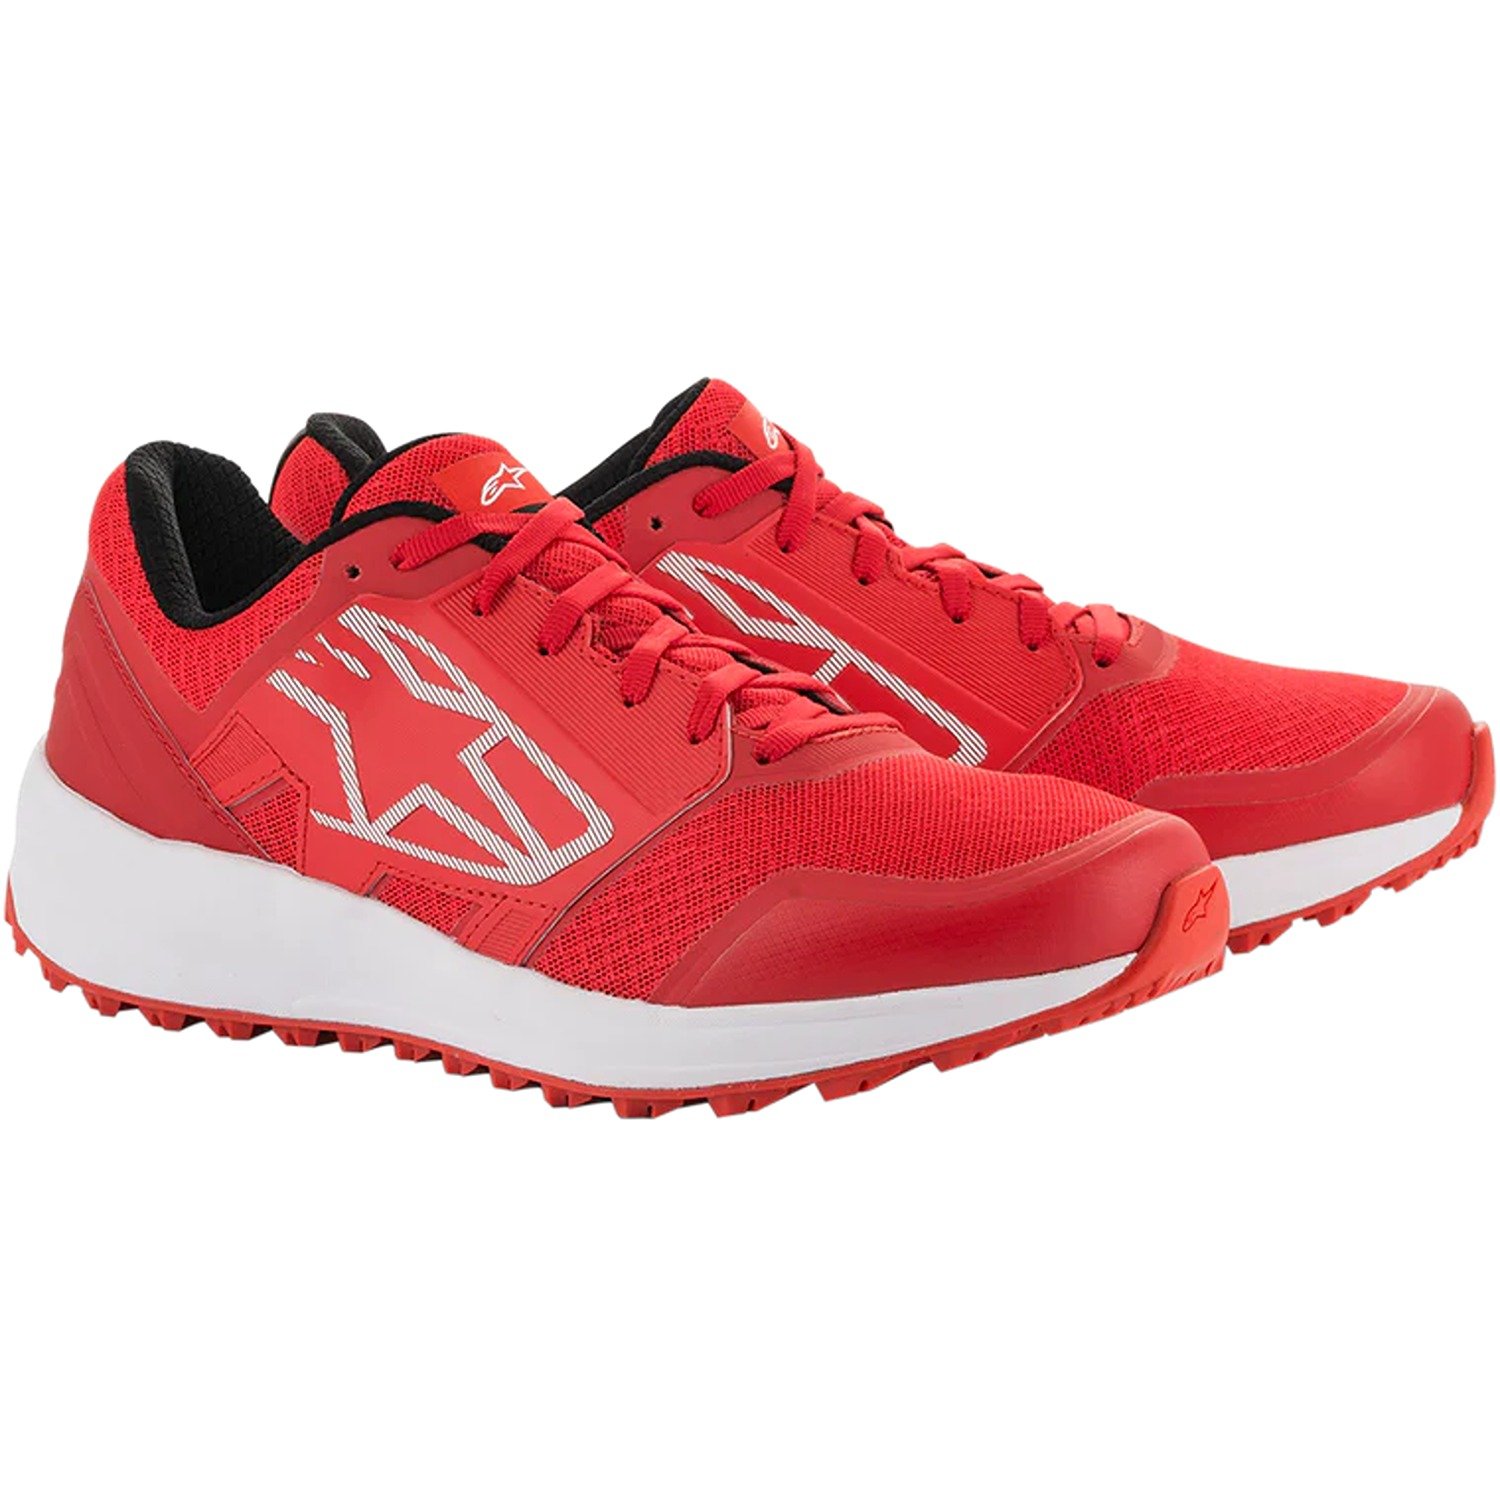 Image of Alpinestars Meta Trail Shoes Red White Taille US 135